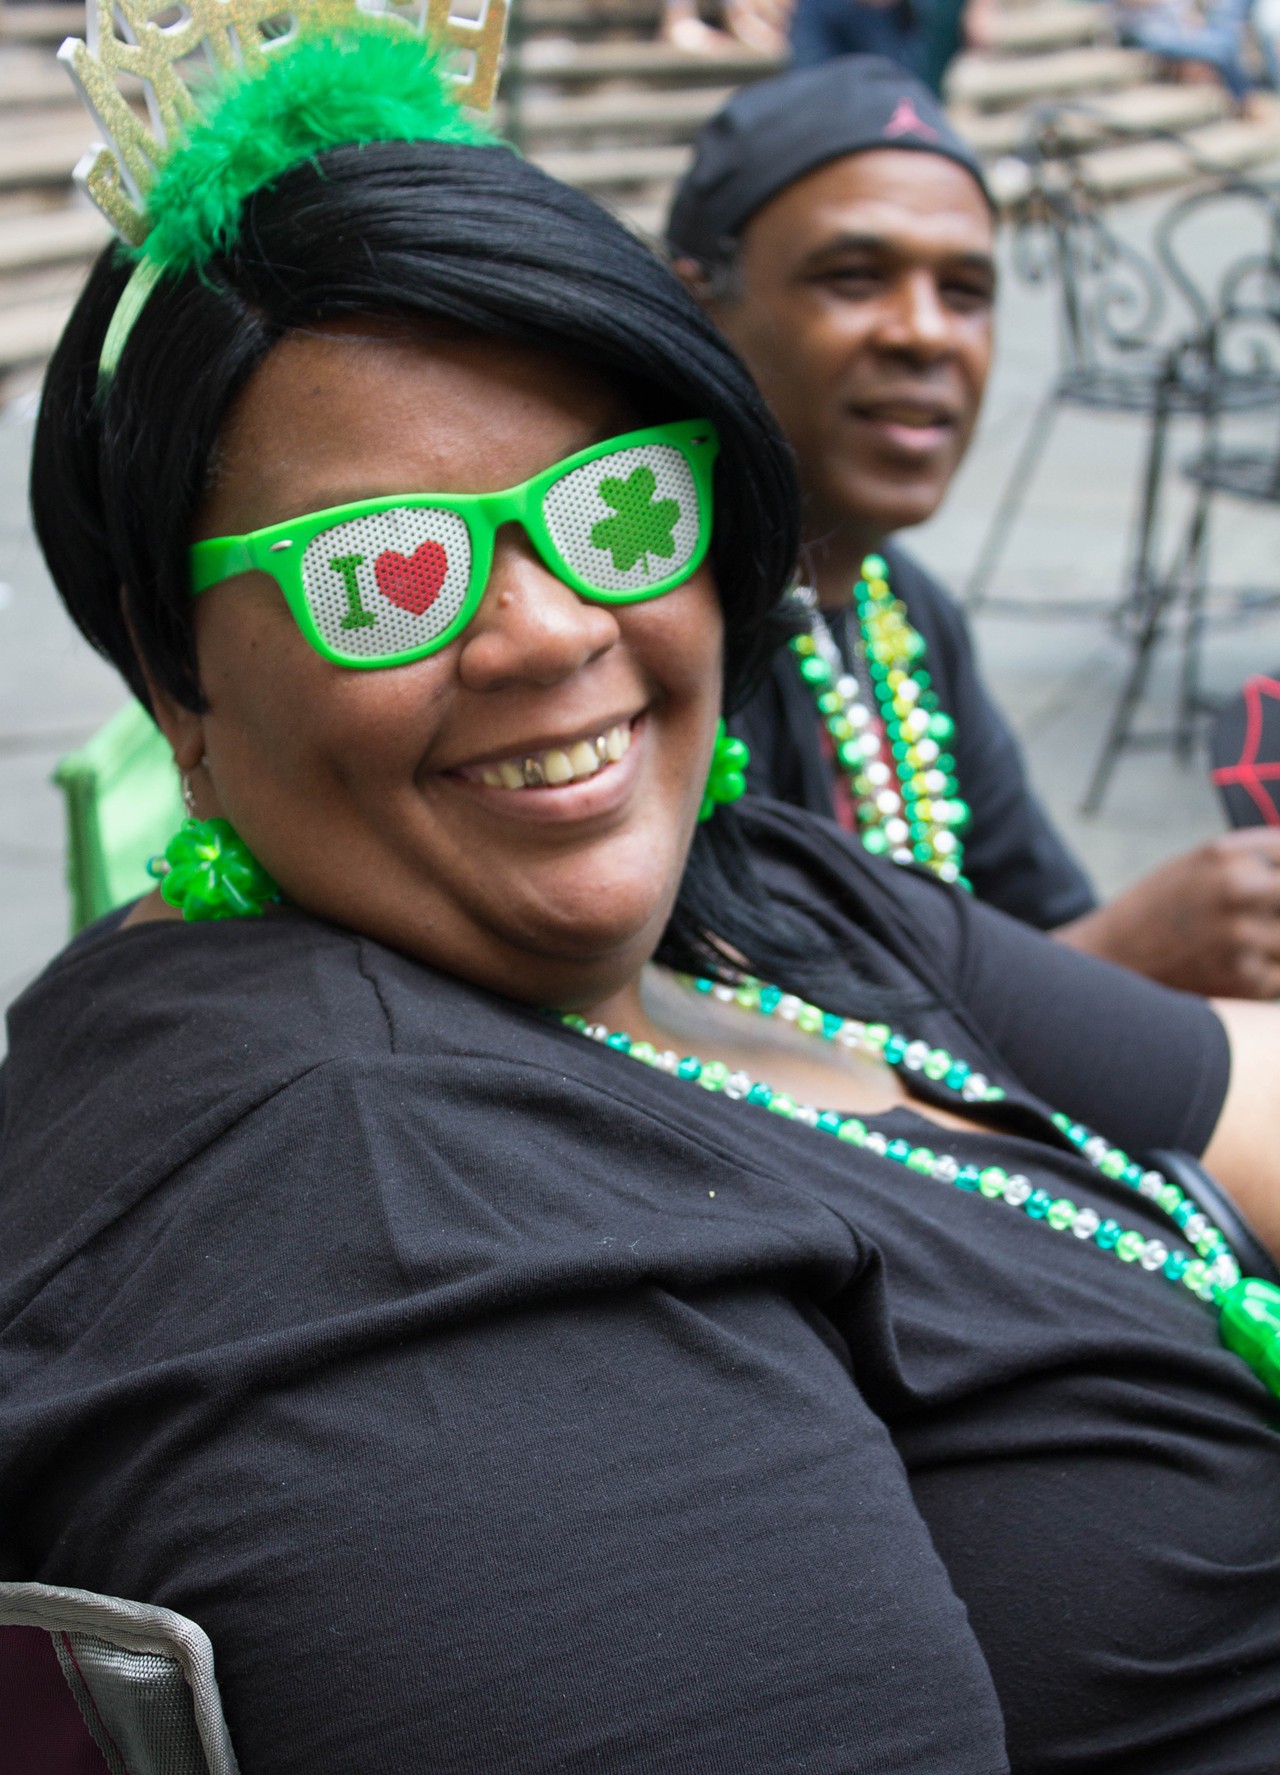 Everyone We Saw at the St. Patrick's Day River Parade and Festival 2018